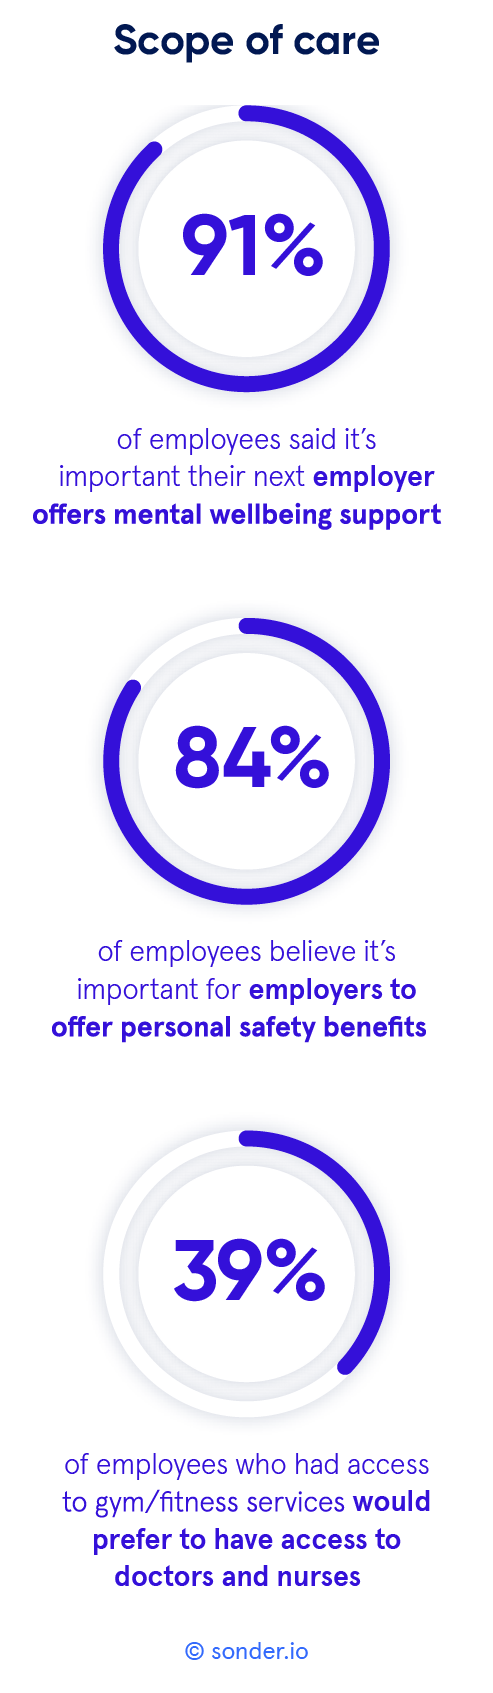 Employee wellbeing surveys in Australia and the UK show employees want safety and medical support as well as mental health counselling.